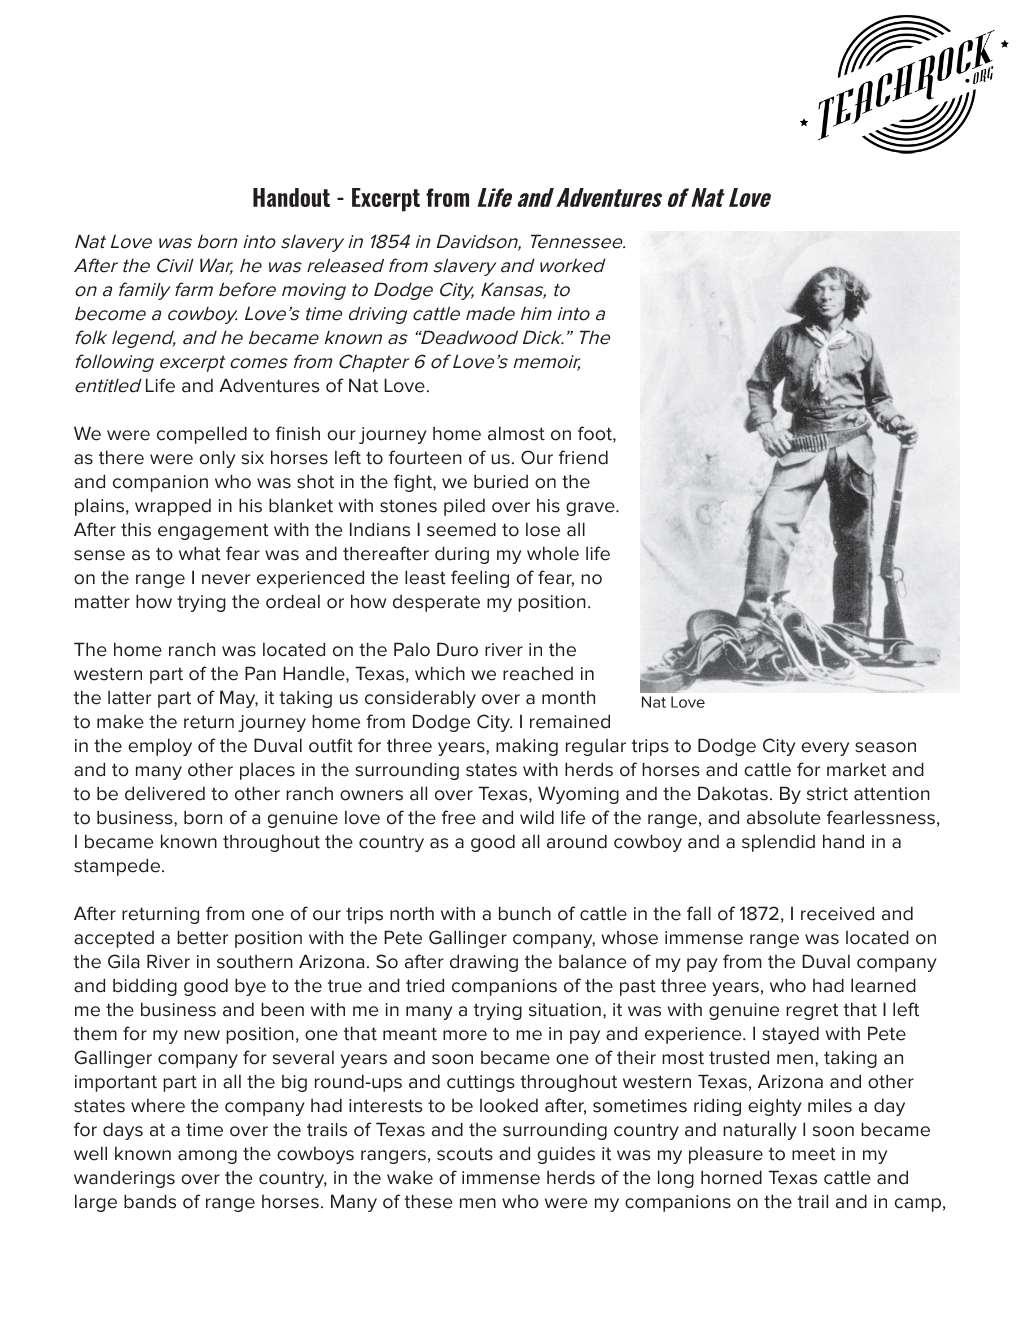 Handout - Excerpt from Life and Adventures of Nat Love Nat Love Was Born Into Slavery in 1854 in Davidson, Tennessee